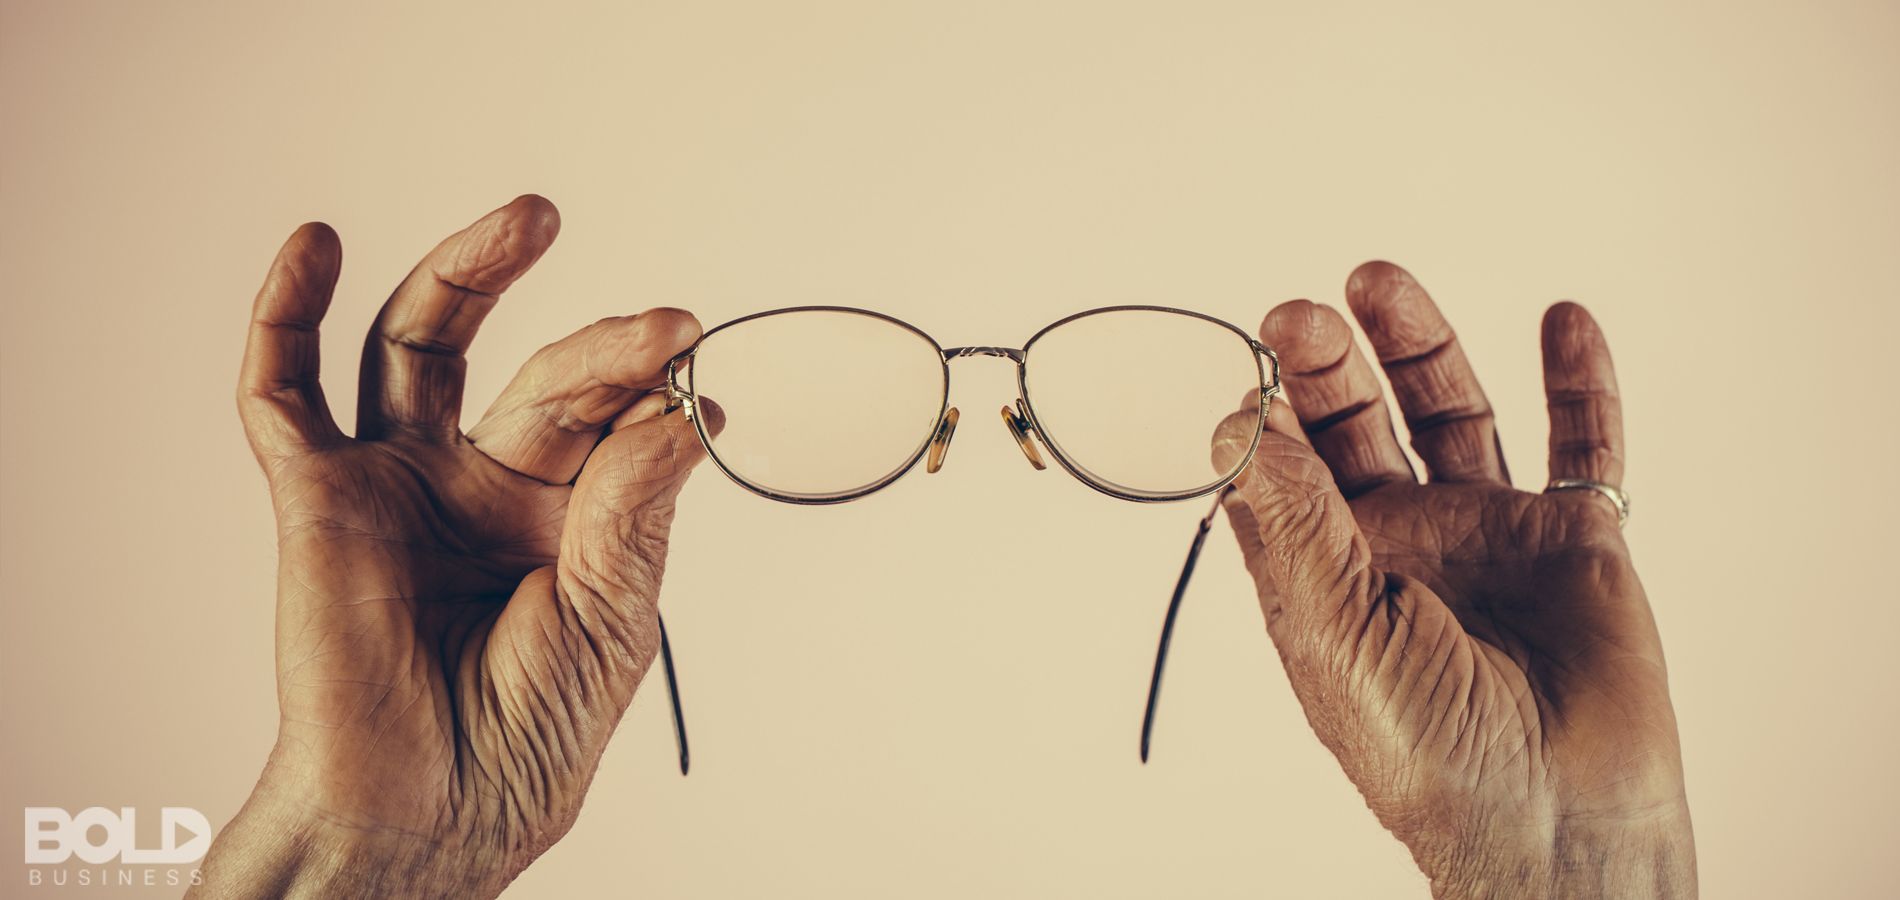 An elderly person holding up a pair of glasses